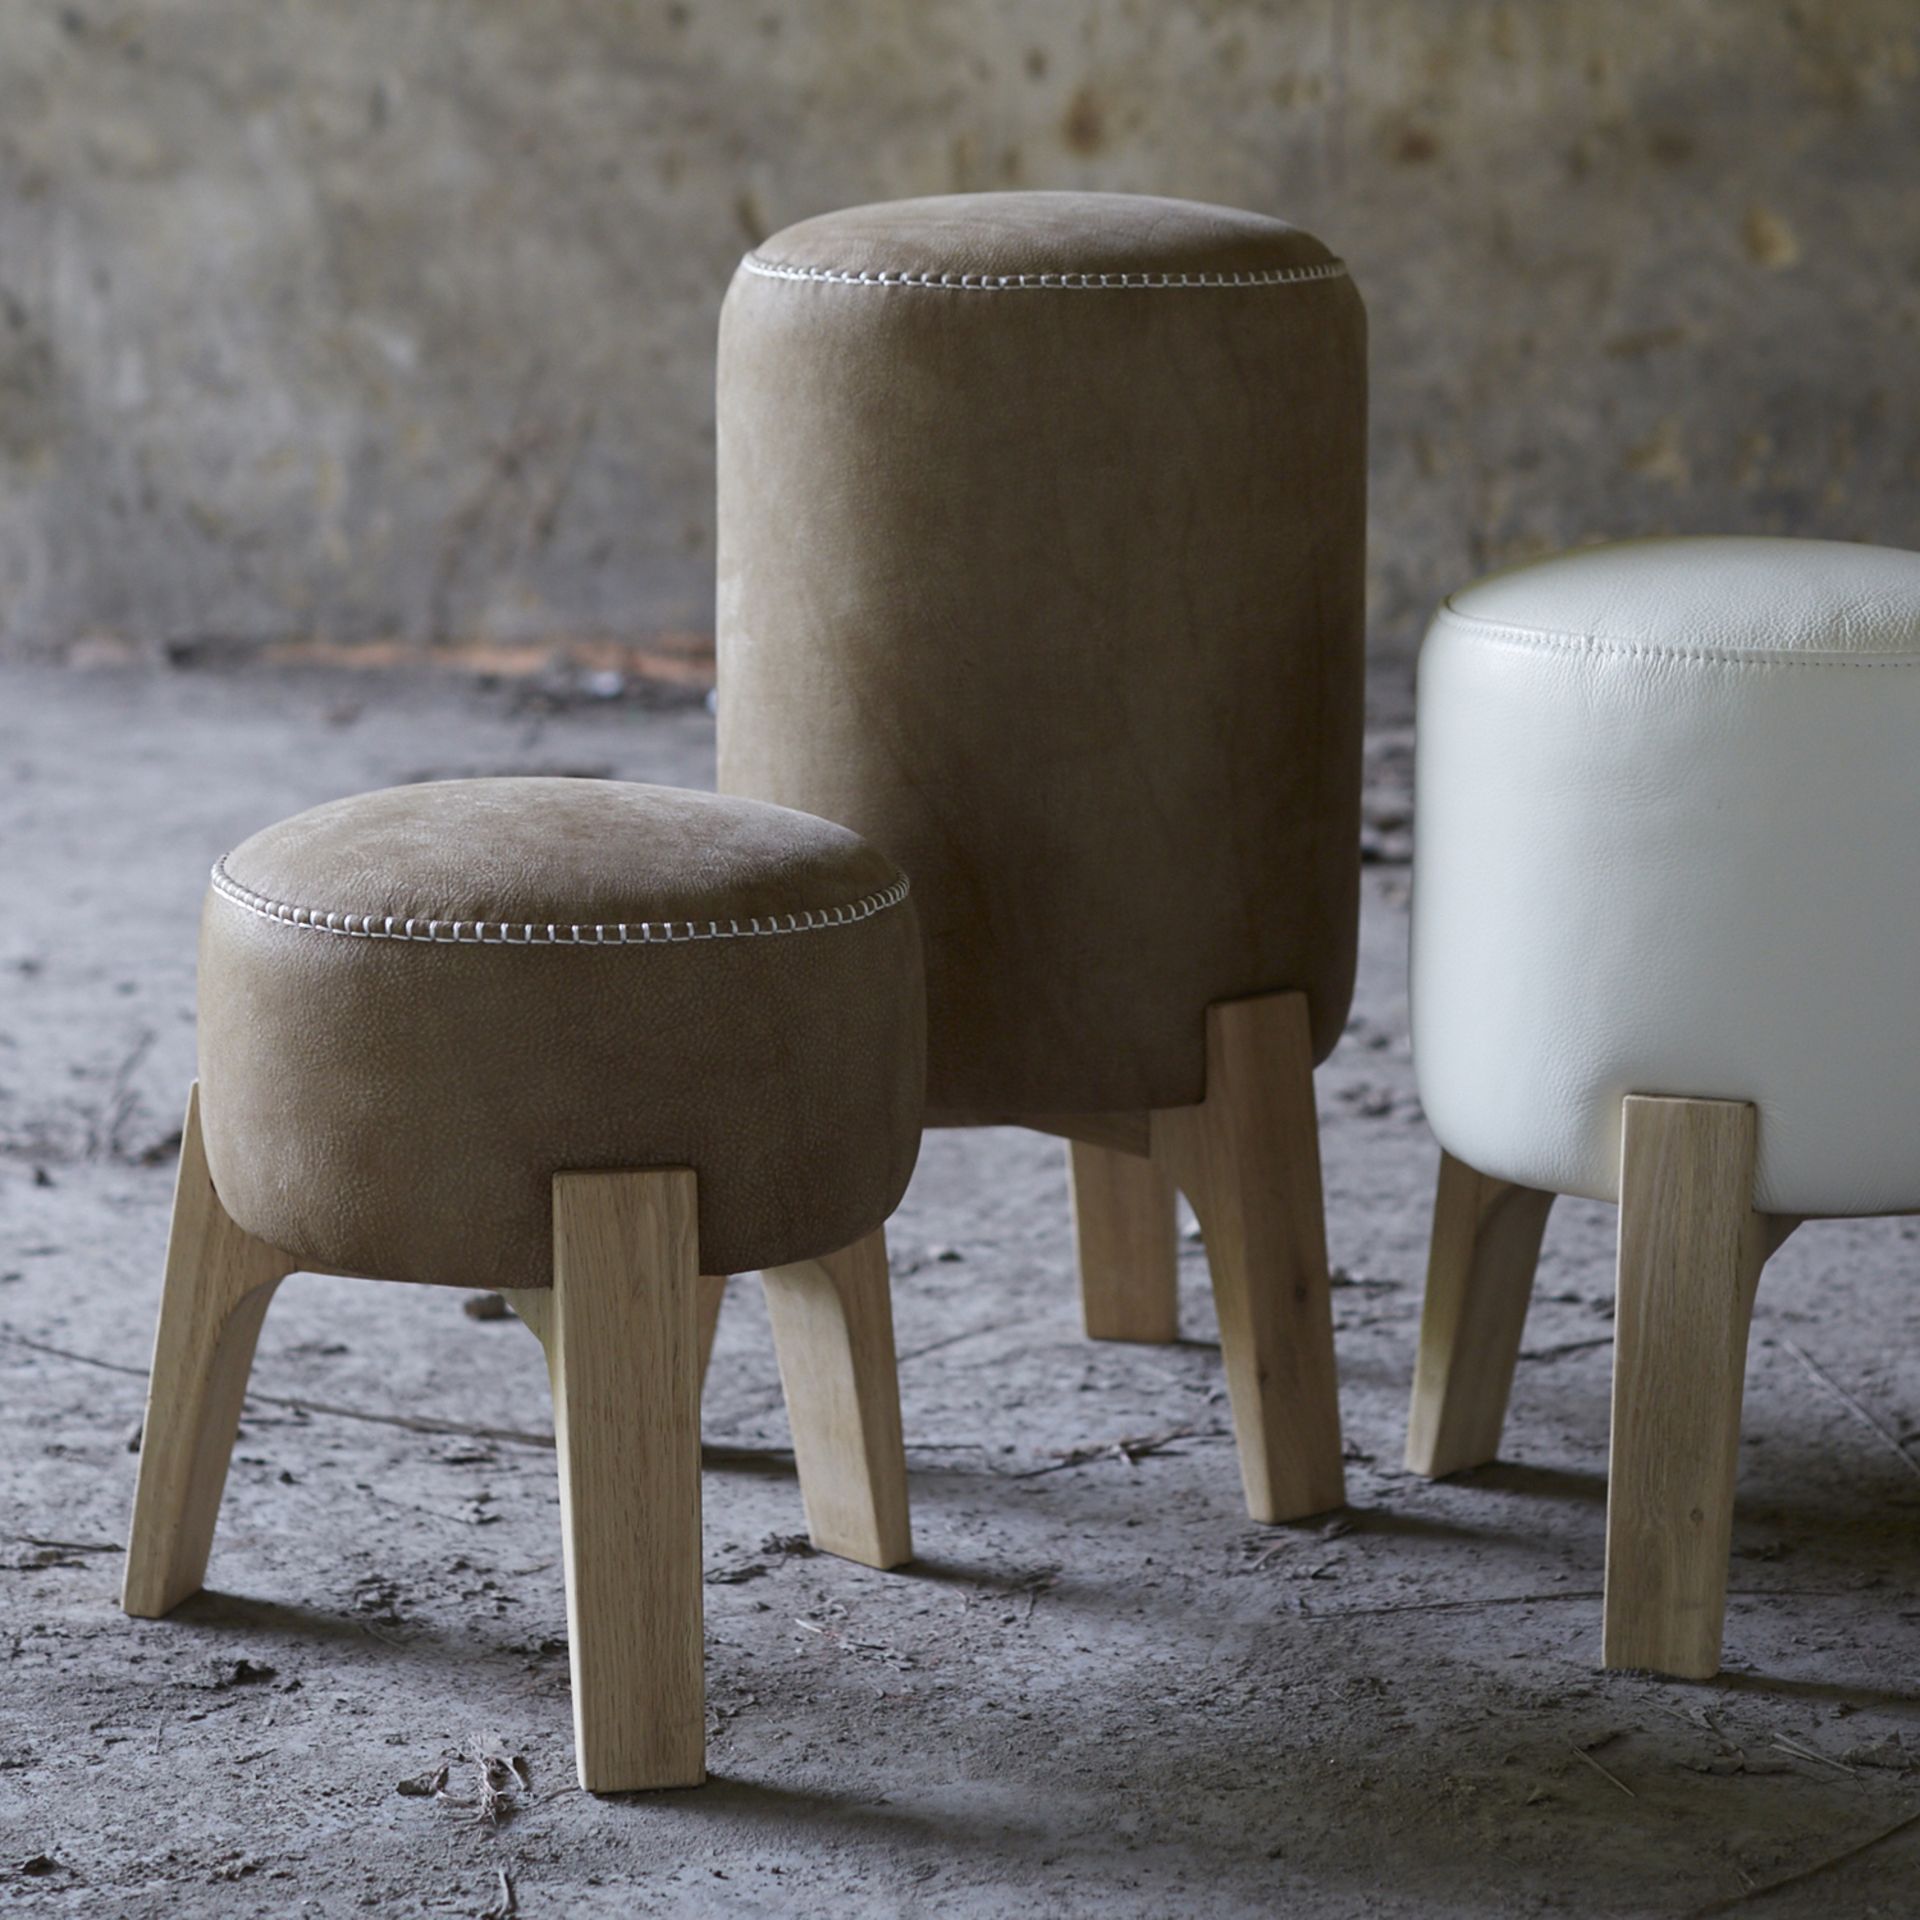 Bleu Nature F296 Drum Stool New Stitching Iroquois Chocolate Leather and Oak 36 x 36 x 47cm RRP £